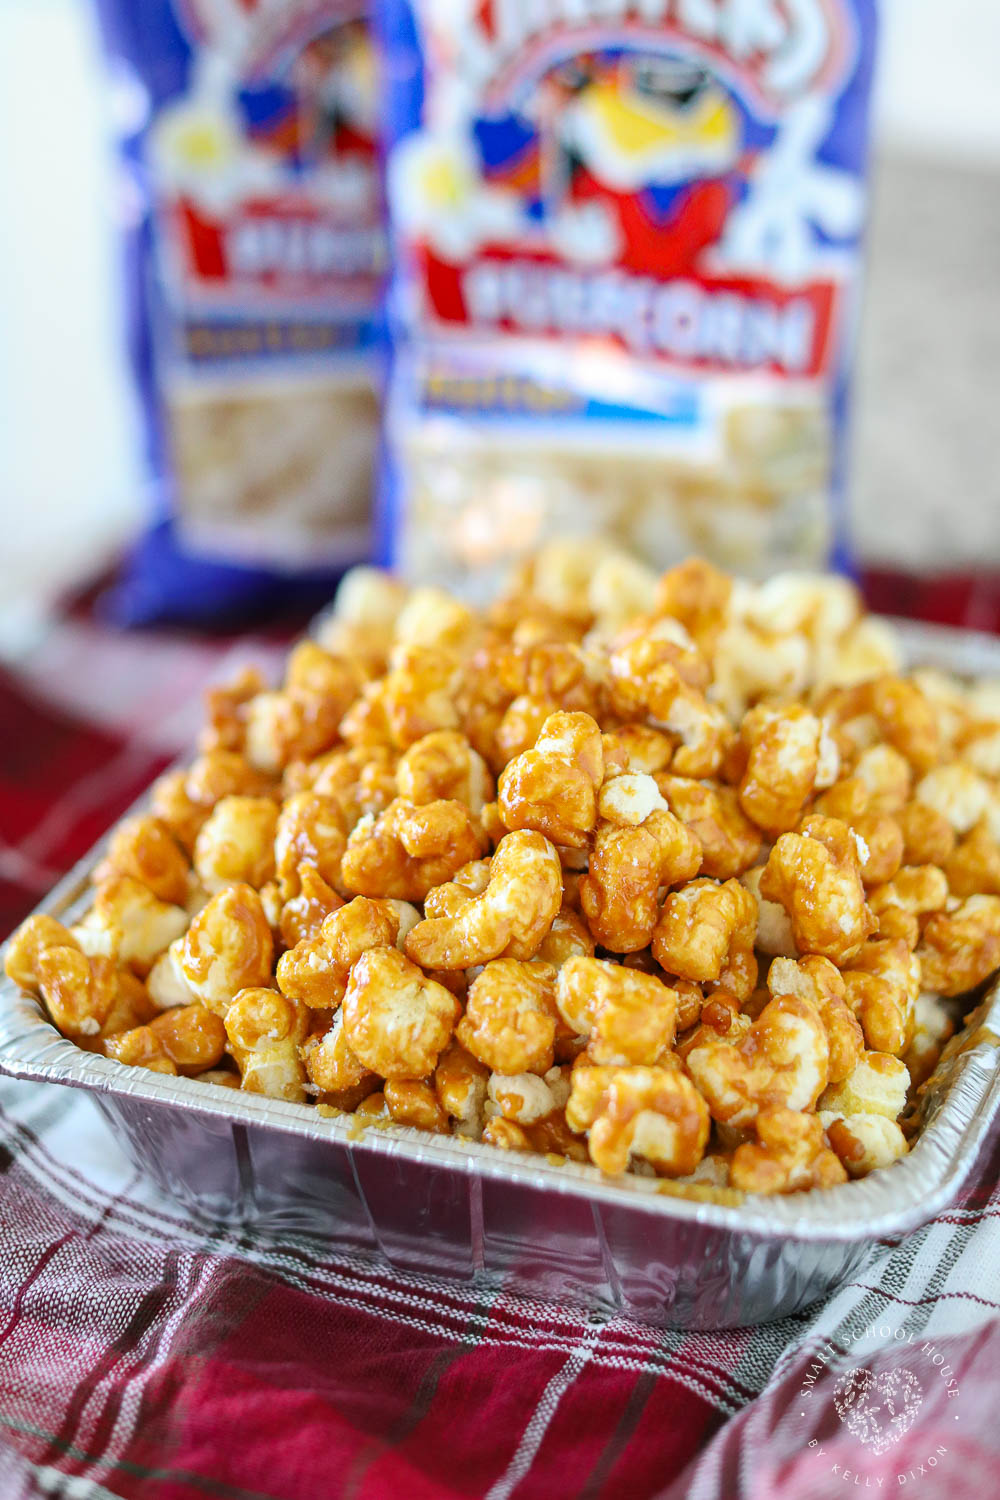 This Caramel Puff Corn Recipe has bigger kernels and more butter flavor than regular caramel corn - Great for movie night or homemade gifts!